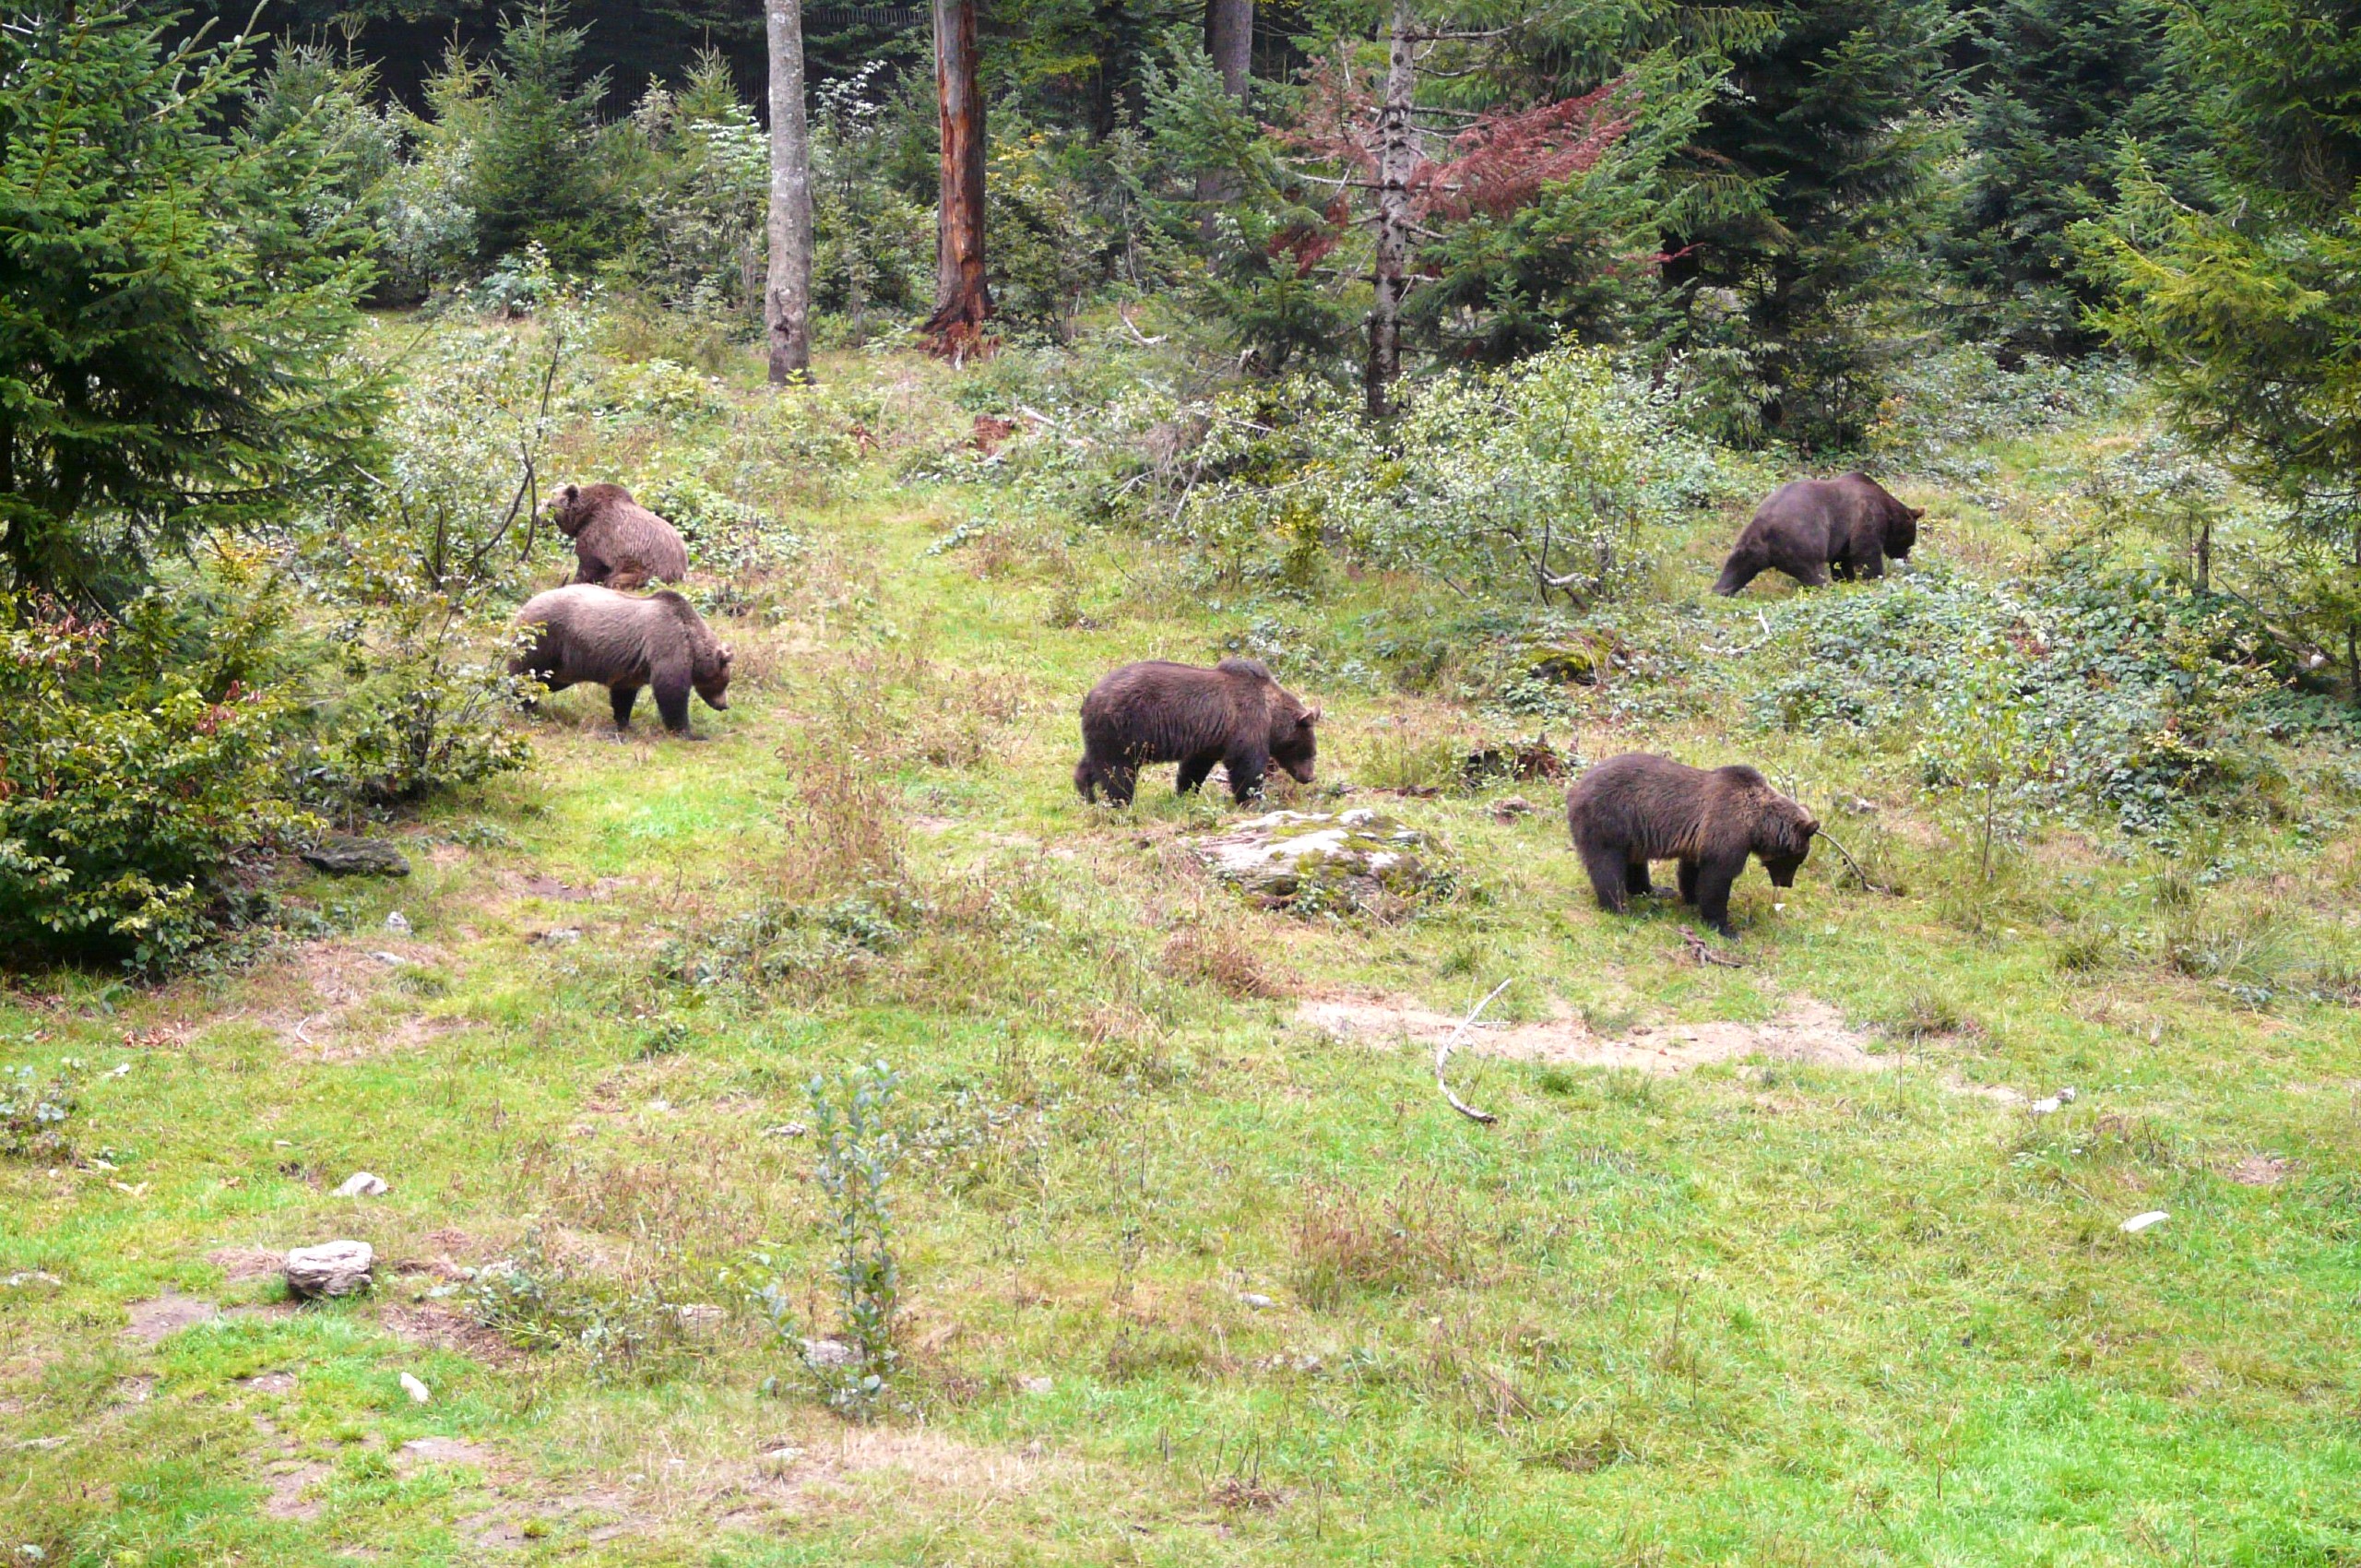 Five grizzlies feeding in the wilderness